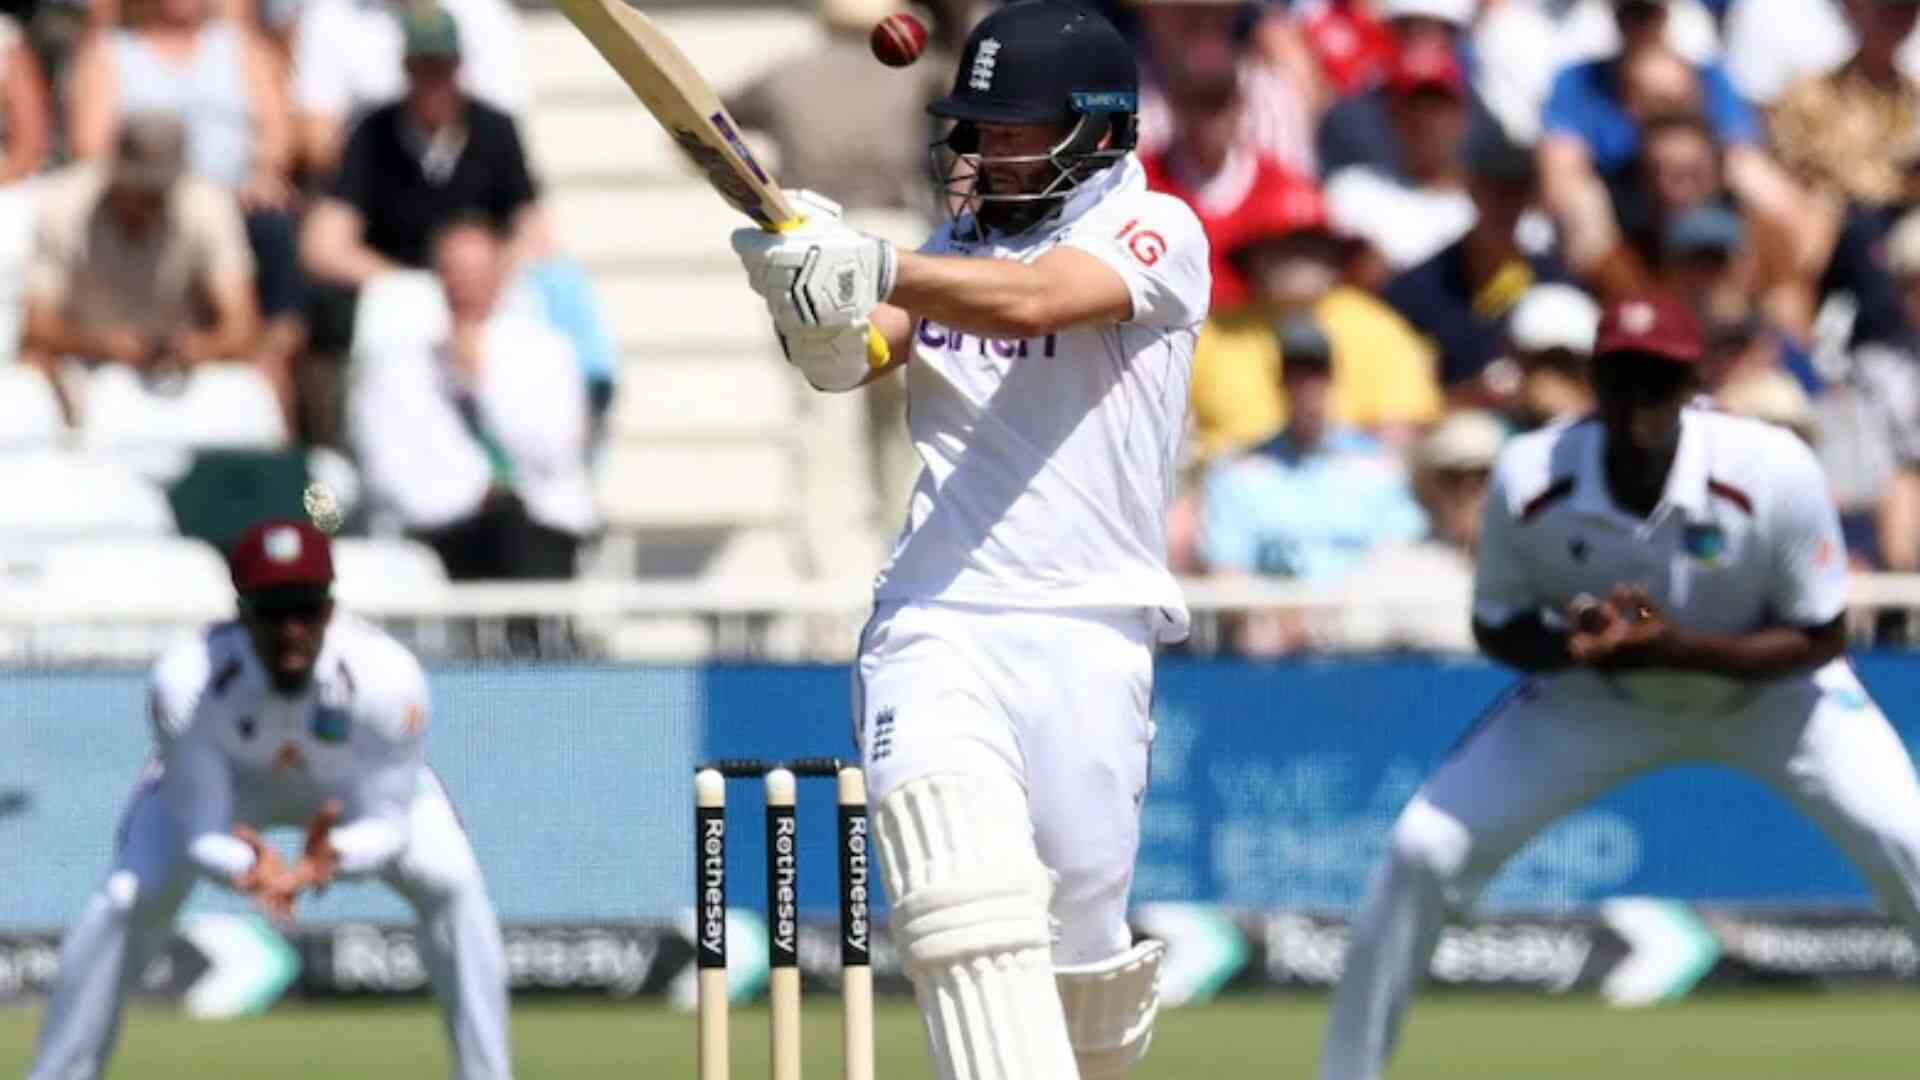 England Sets A Record Of Fastest Fifty In This Format